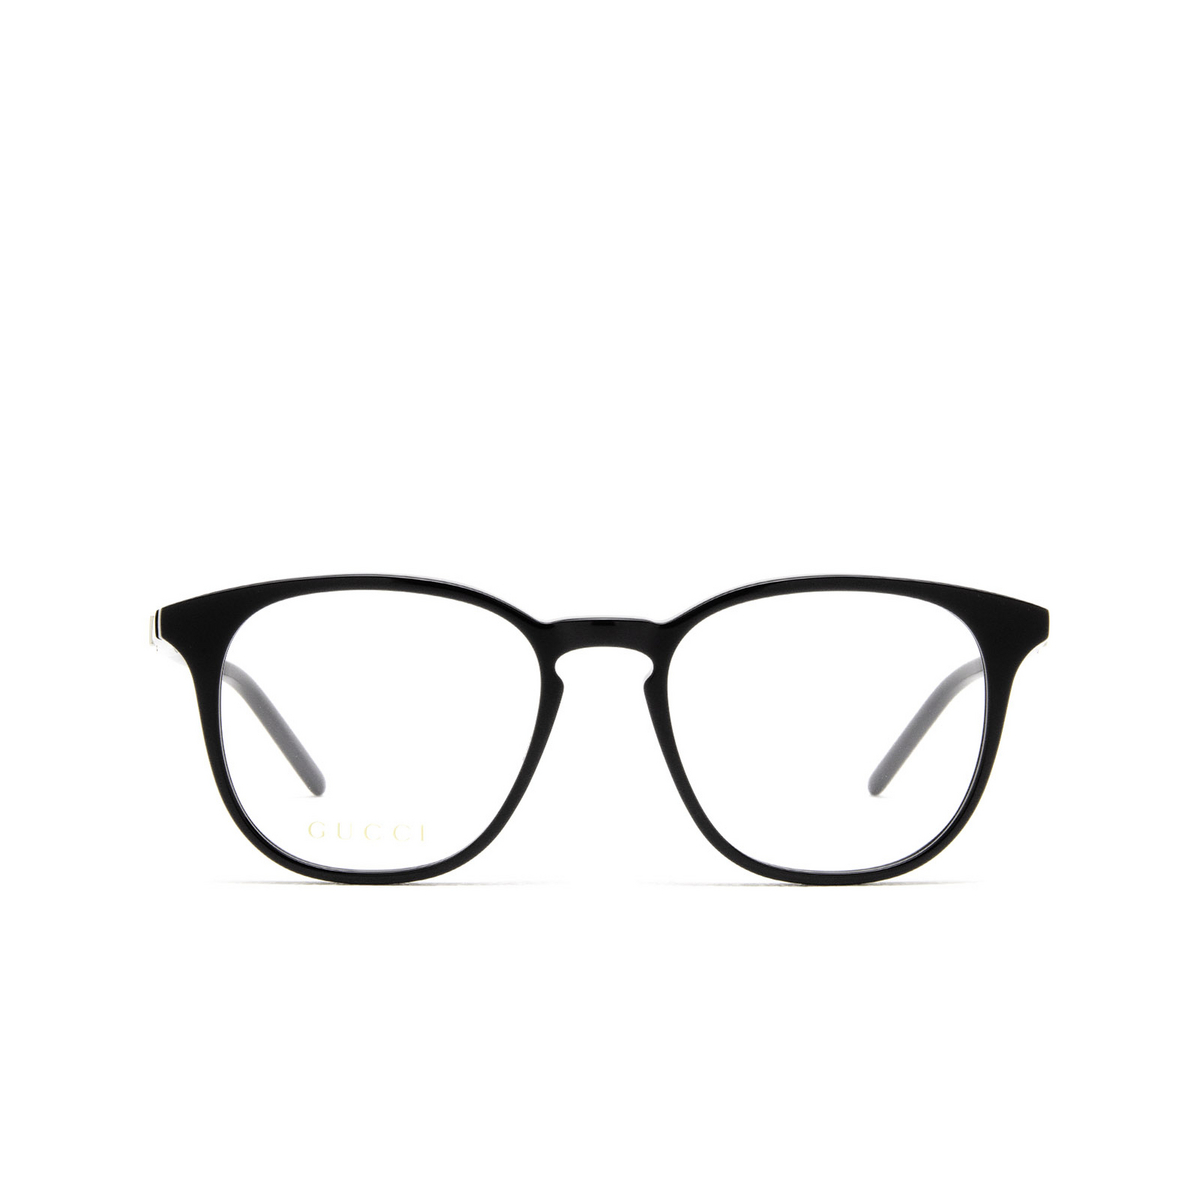 Gucci® Square Eyeglasses: GG1157O color Black 004 - front view.